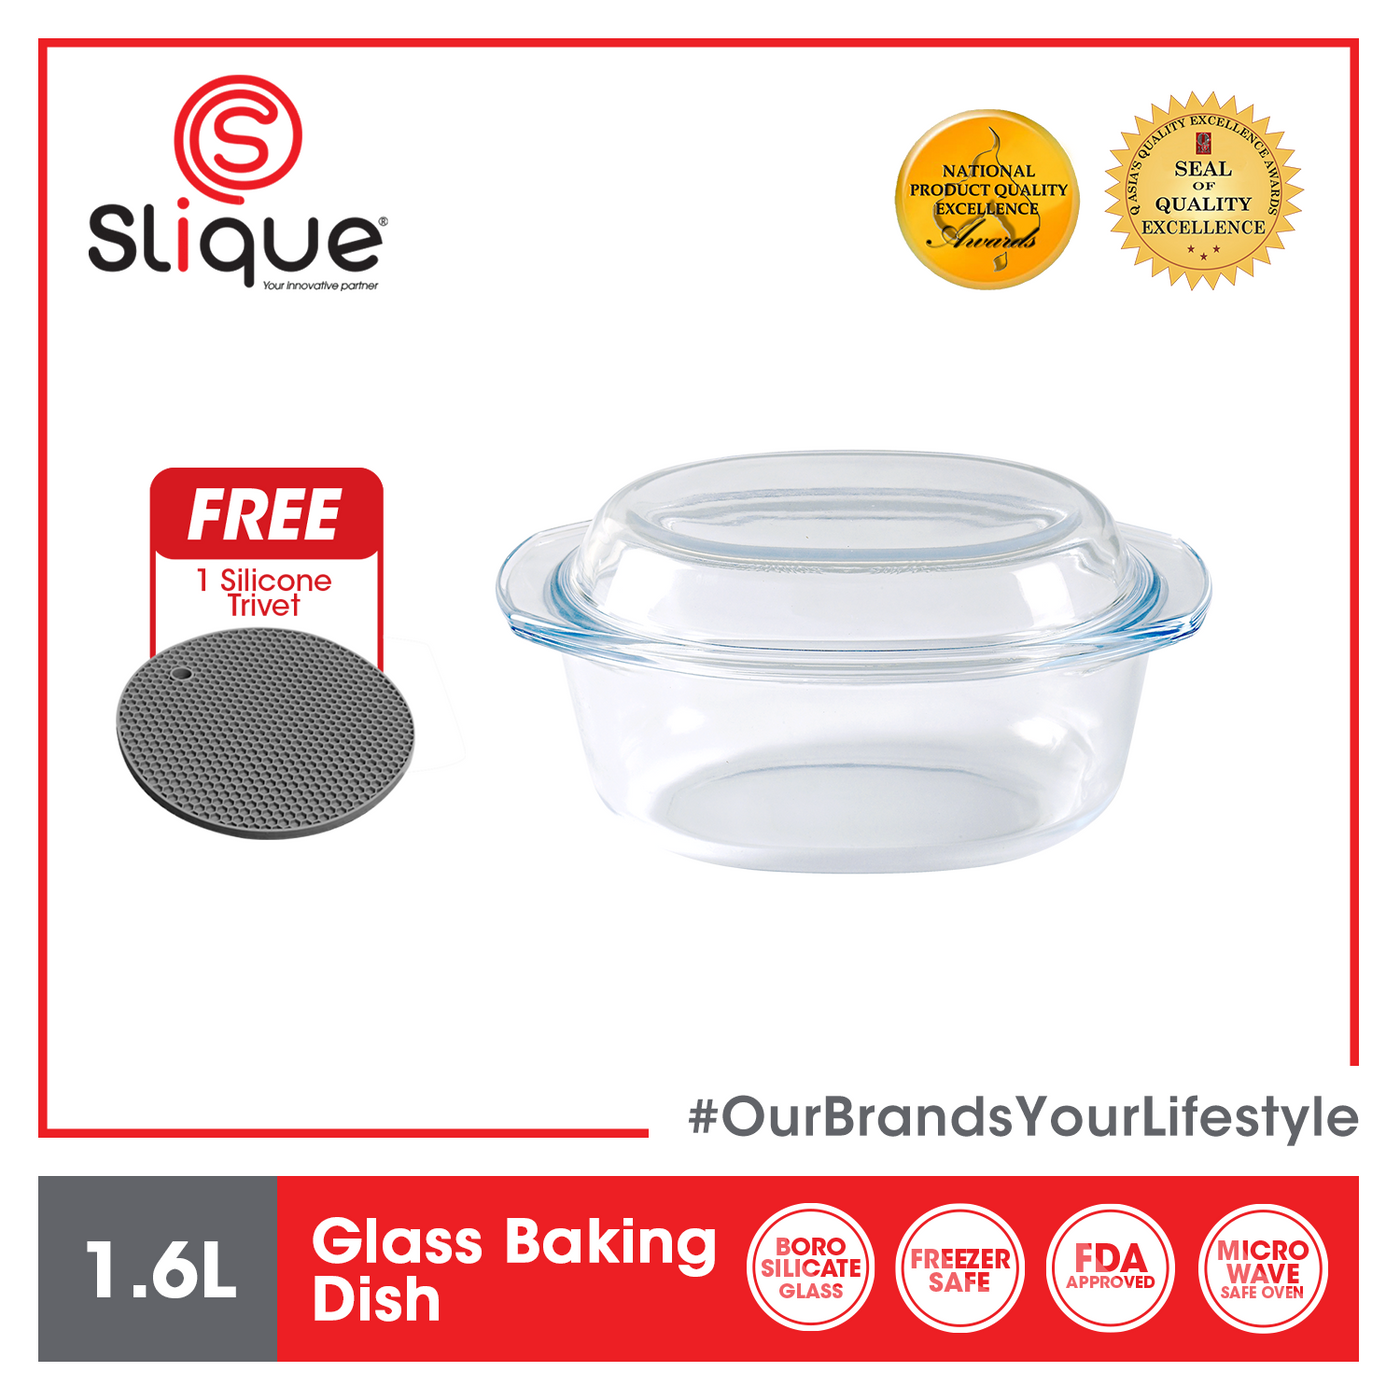 SLIQUE Premium Borosilicate Oval Glass Baking Dish Microwave & Oven Safe 1000ml Baking Essentials Amazing Gift Idea For Any Occasion!